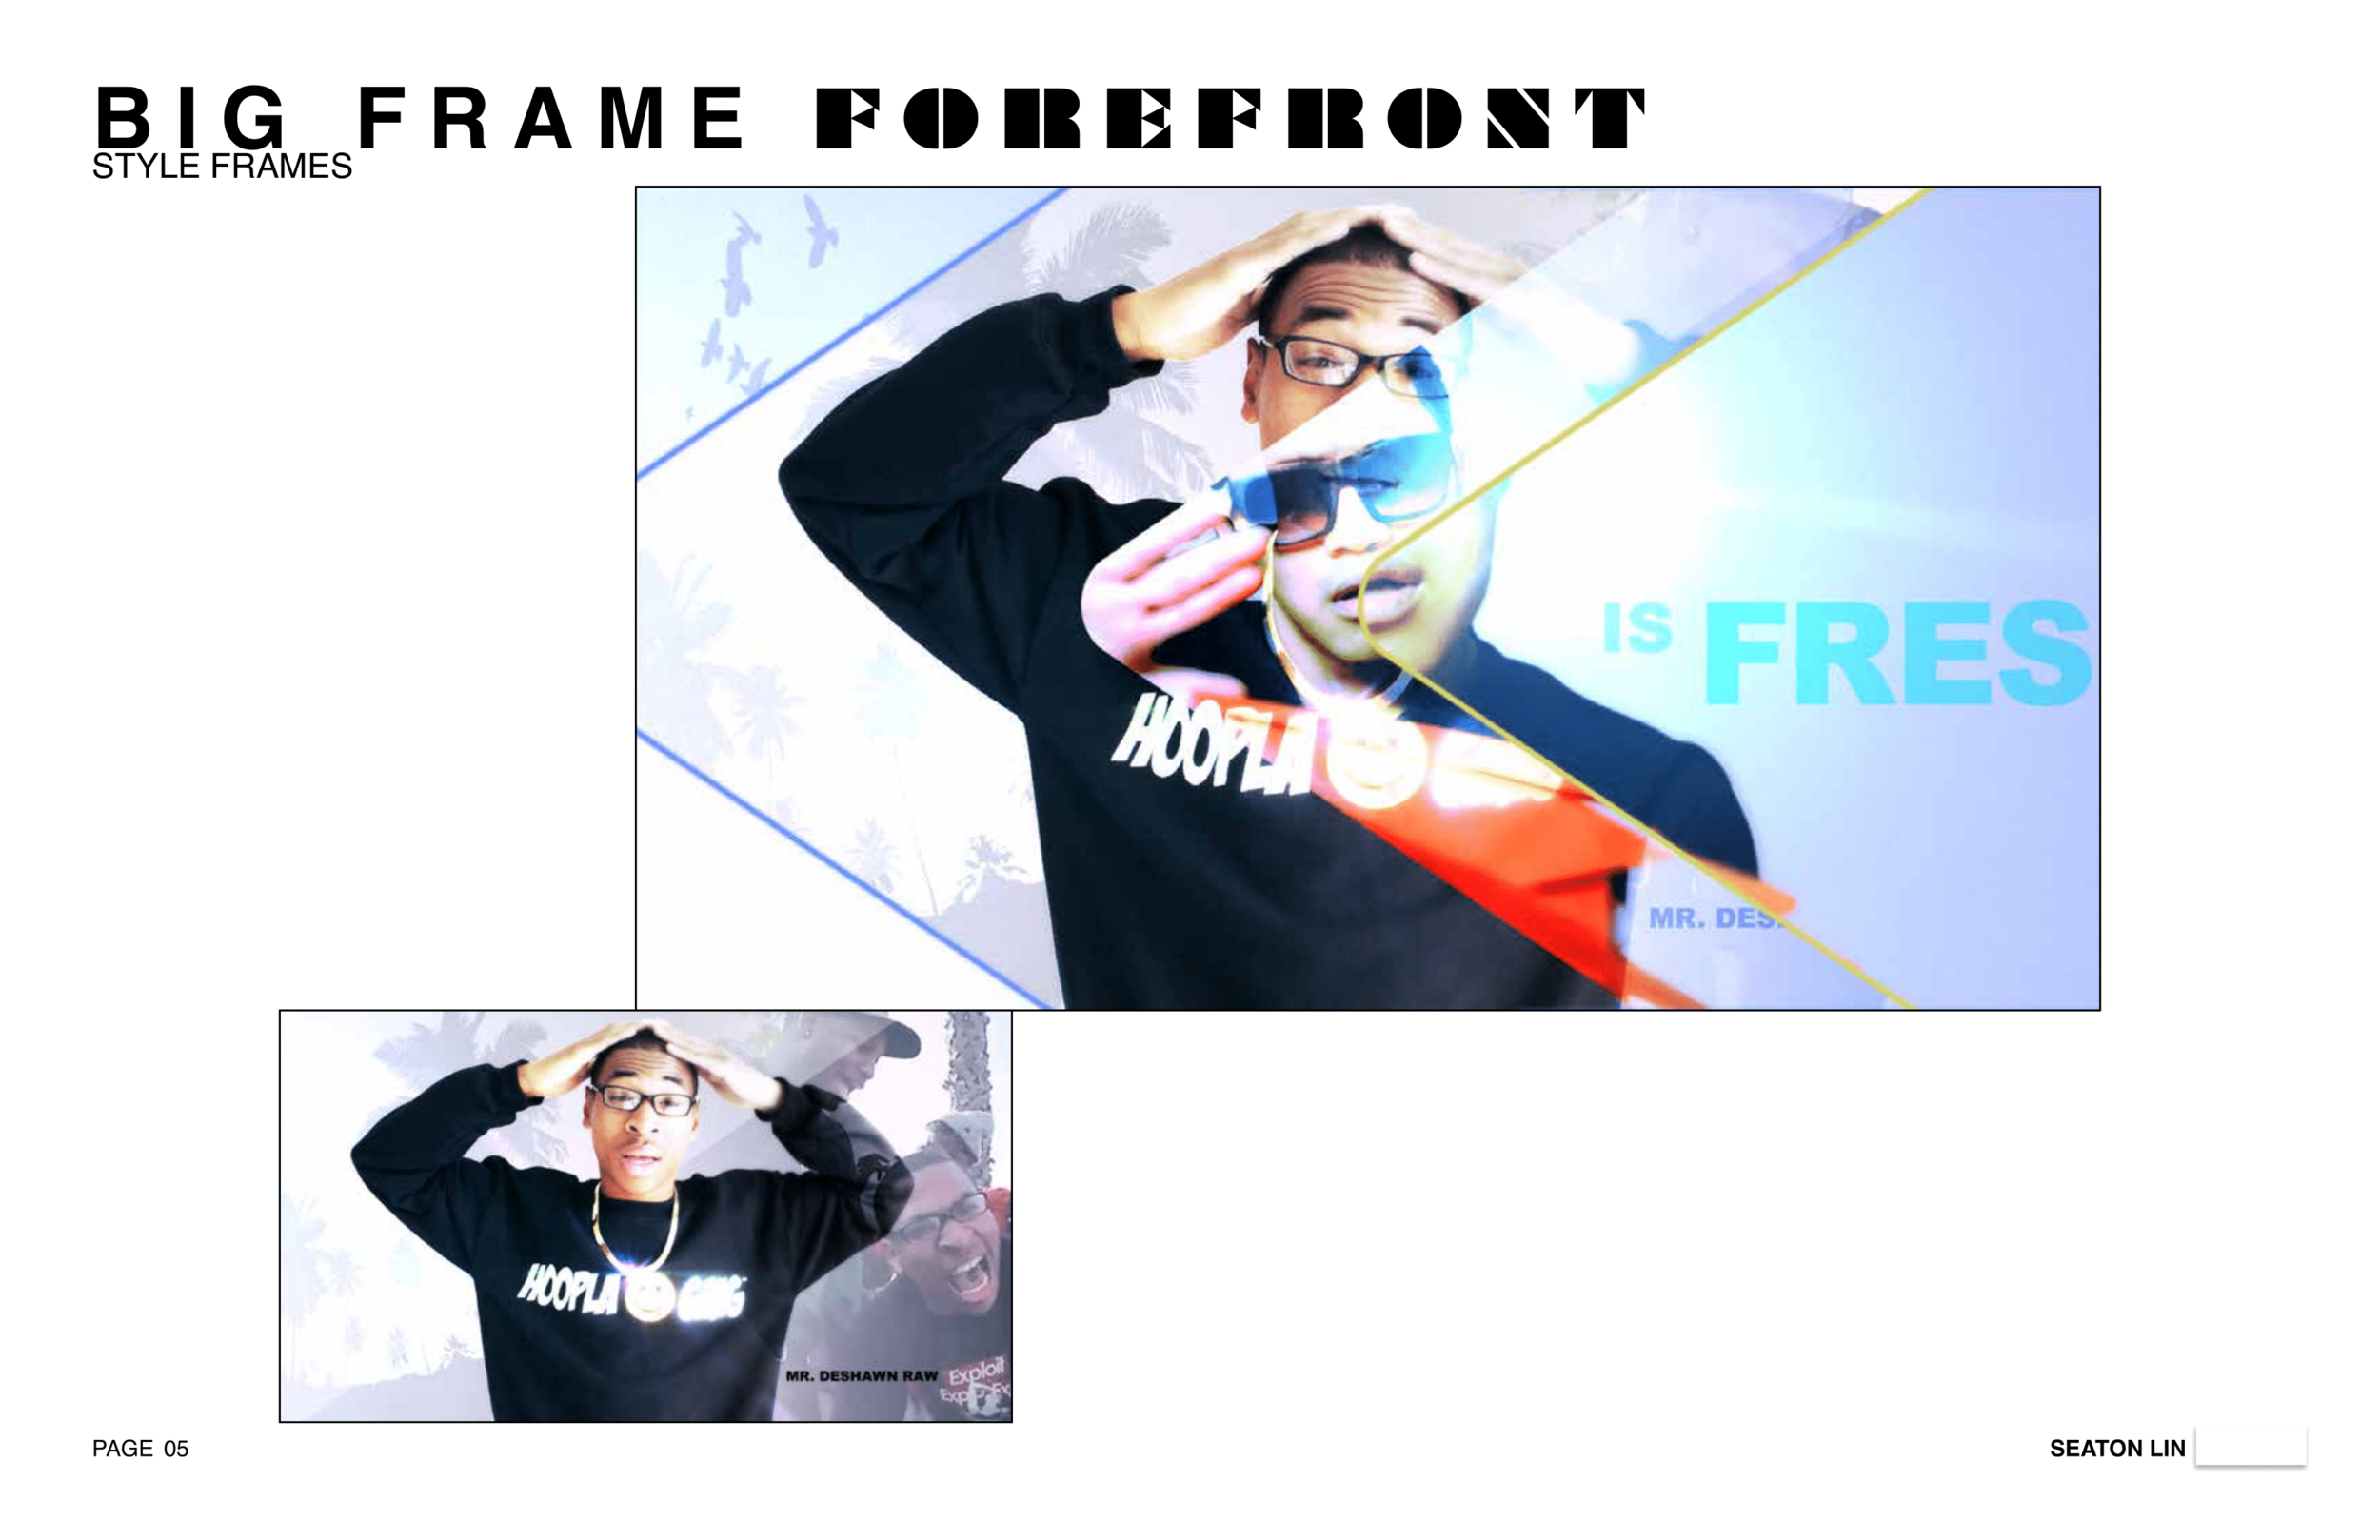 BigFrame_ForeFront_Treatment_SeatonLin-05.png